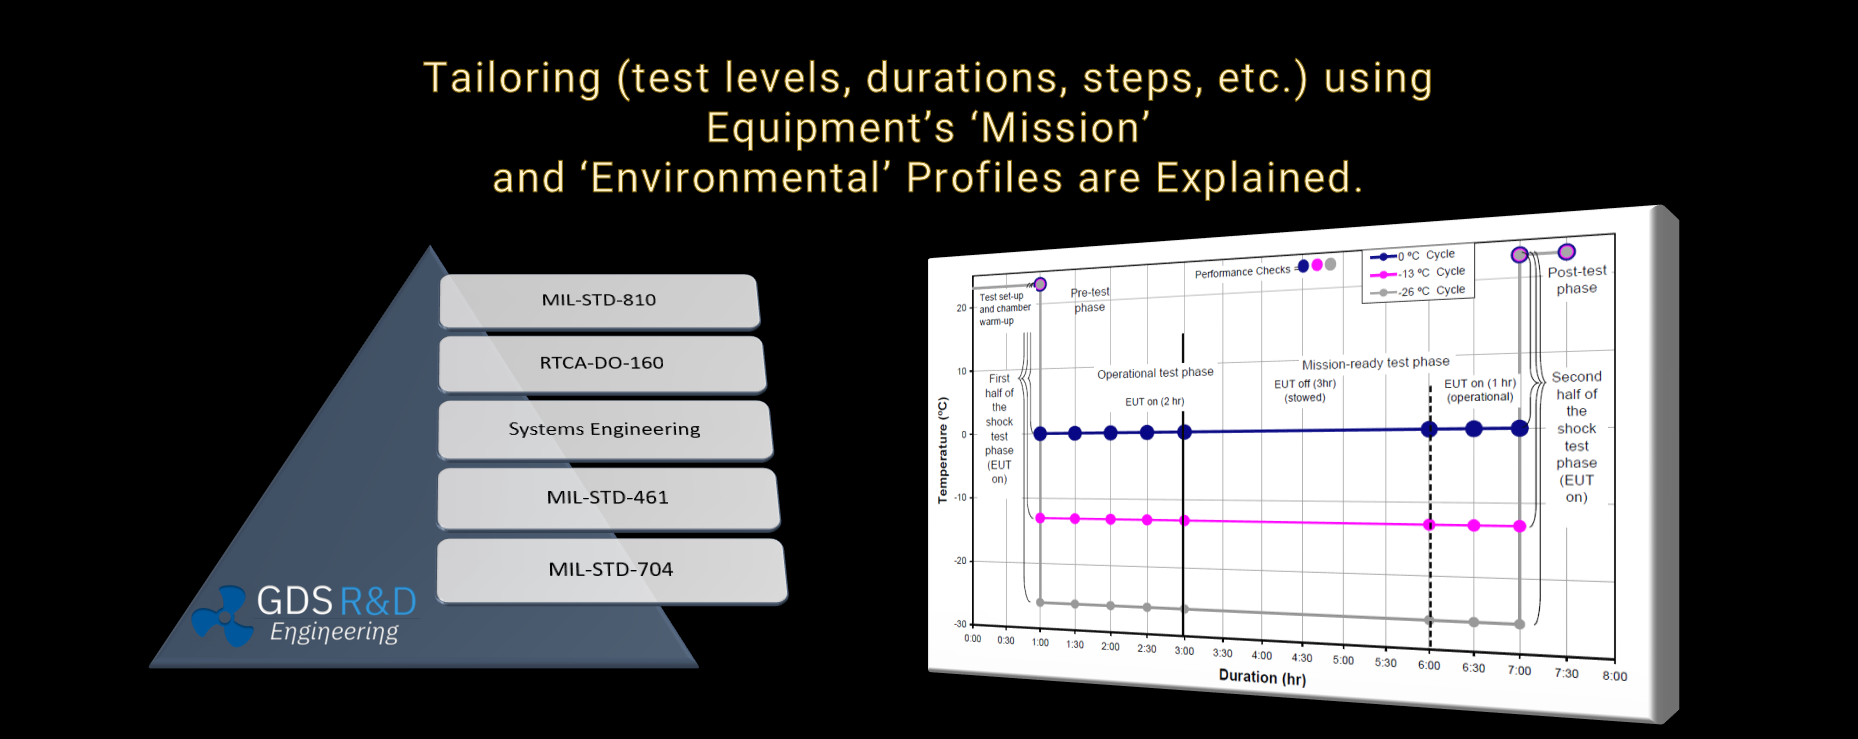 Online Training on MIL-STD-810H, RTCA-DO-160, MIL-STD-461G Environmental Testing of Products, provided by GDS Engineering R&D, Systems Engineering Products and Solutions. Training Led by a Live US-based Sr. Instructor: Dr. Ismail Cicek. Product Verification and Validation Courses for Integrated Systems. C-17 Military Aicraft. FAA/EASA. US DoD. Safety First. US Army. US Air Force and US Navy Tailoring Examples for Mission and Environmental Profile. Setting Test Limits and Durations are Explained.